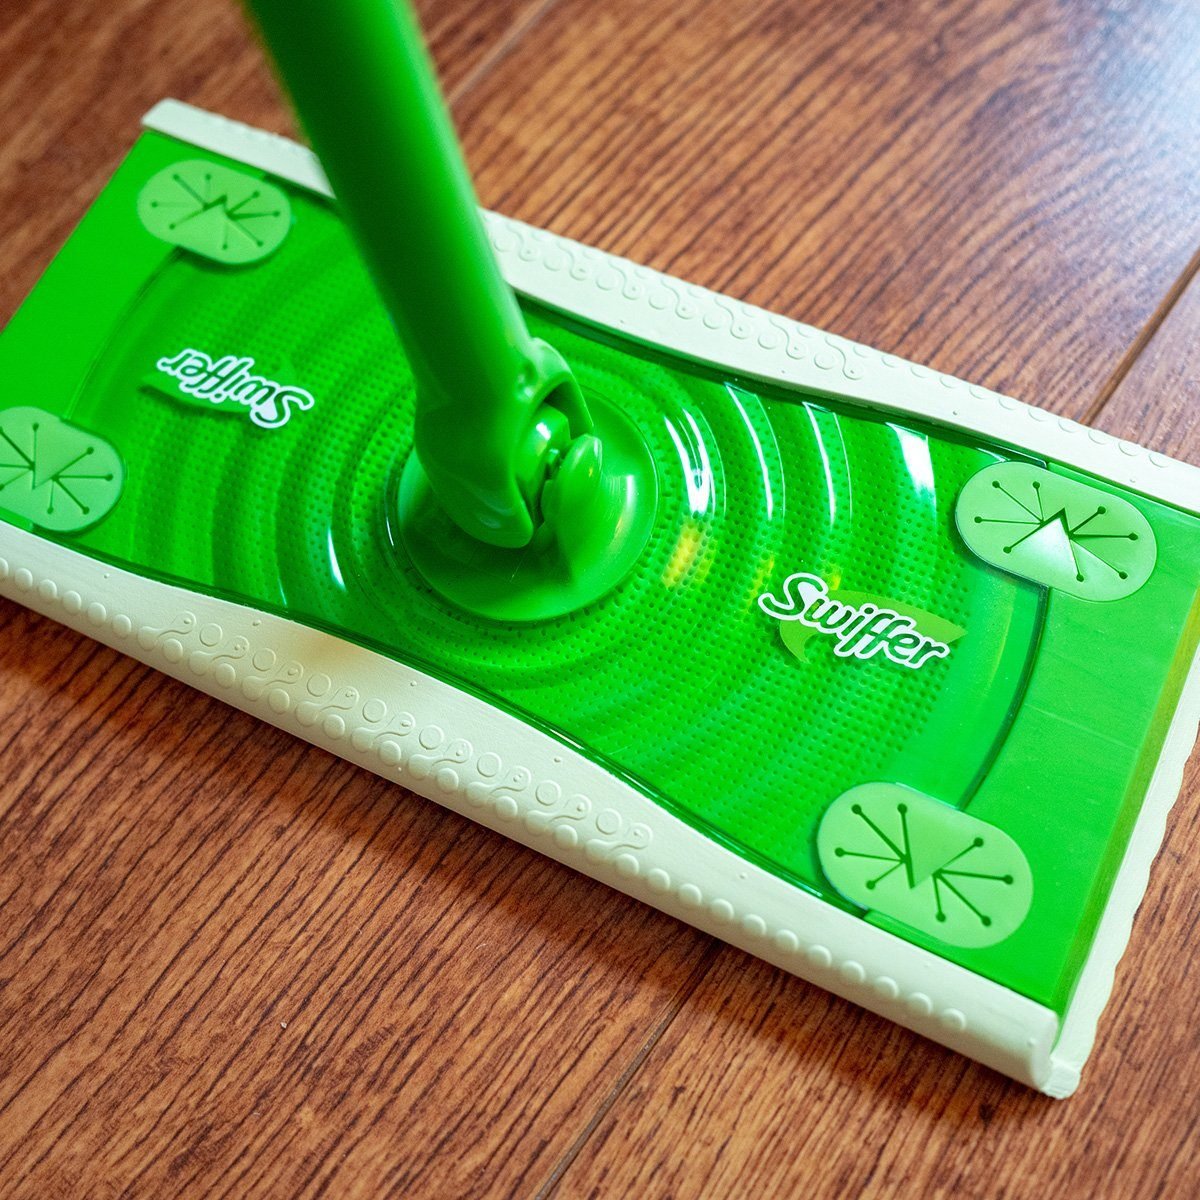 Never Clean With A Swiffer, Can Wet Swiffer Be Used On Laminate Floors